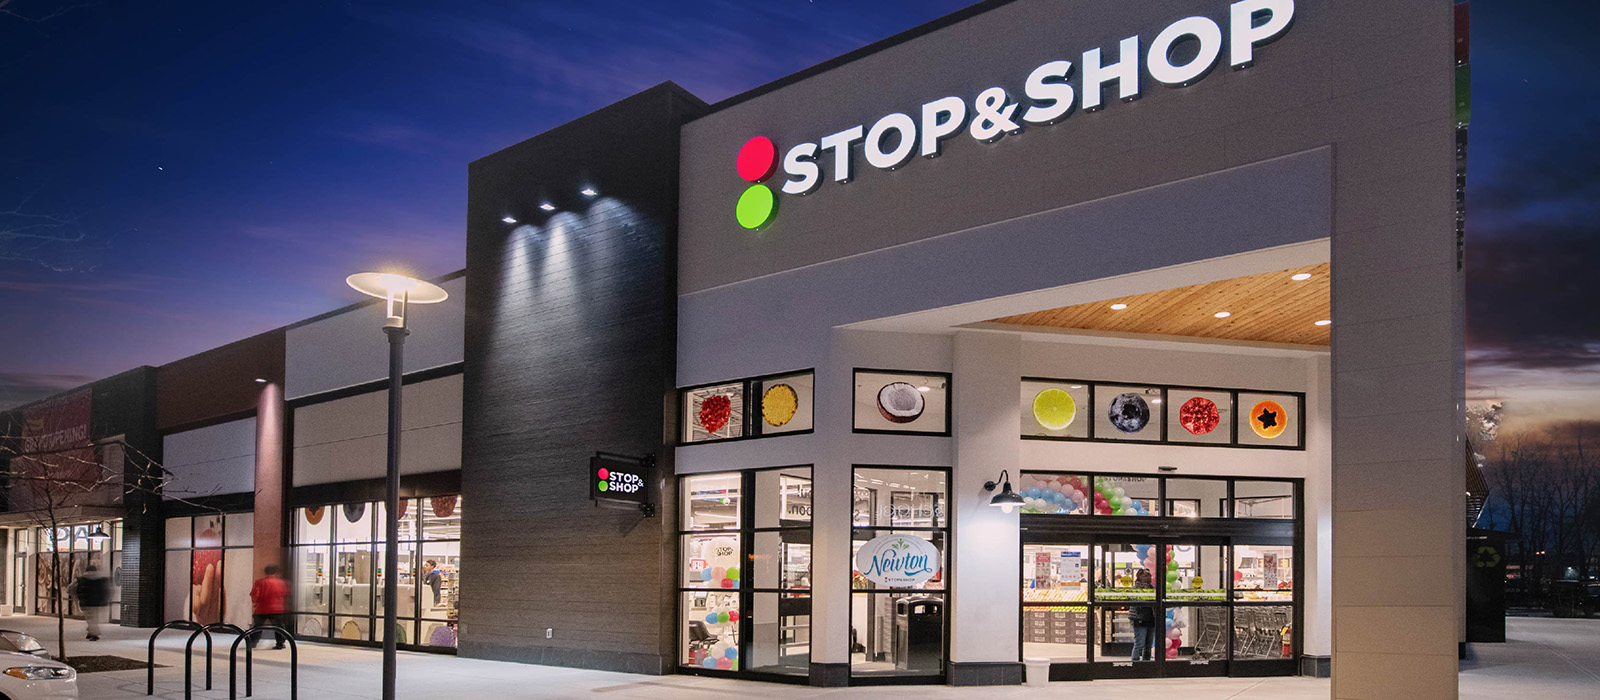 Outside exterior of stop & shop store